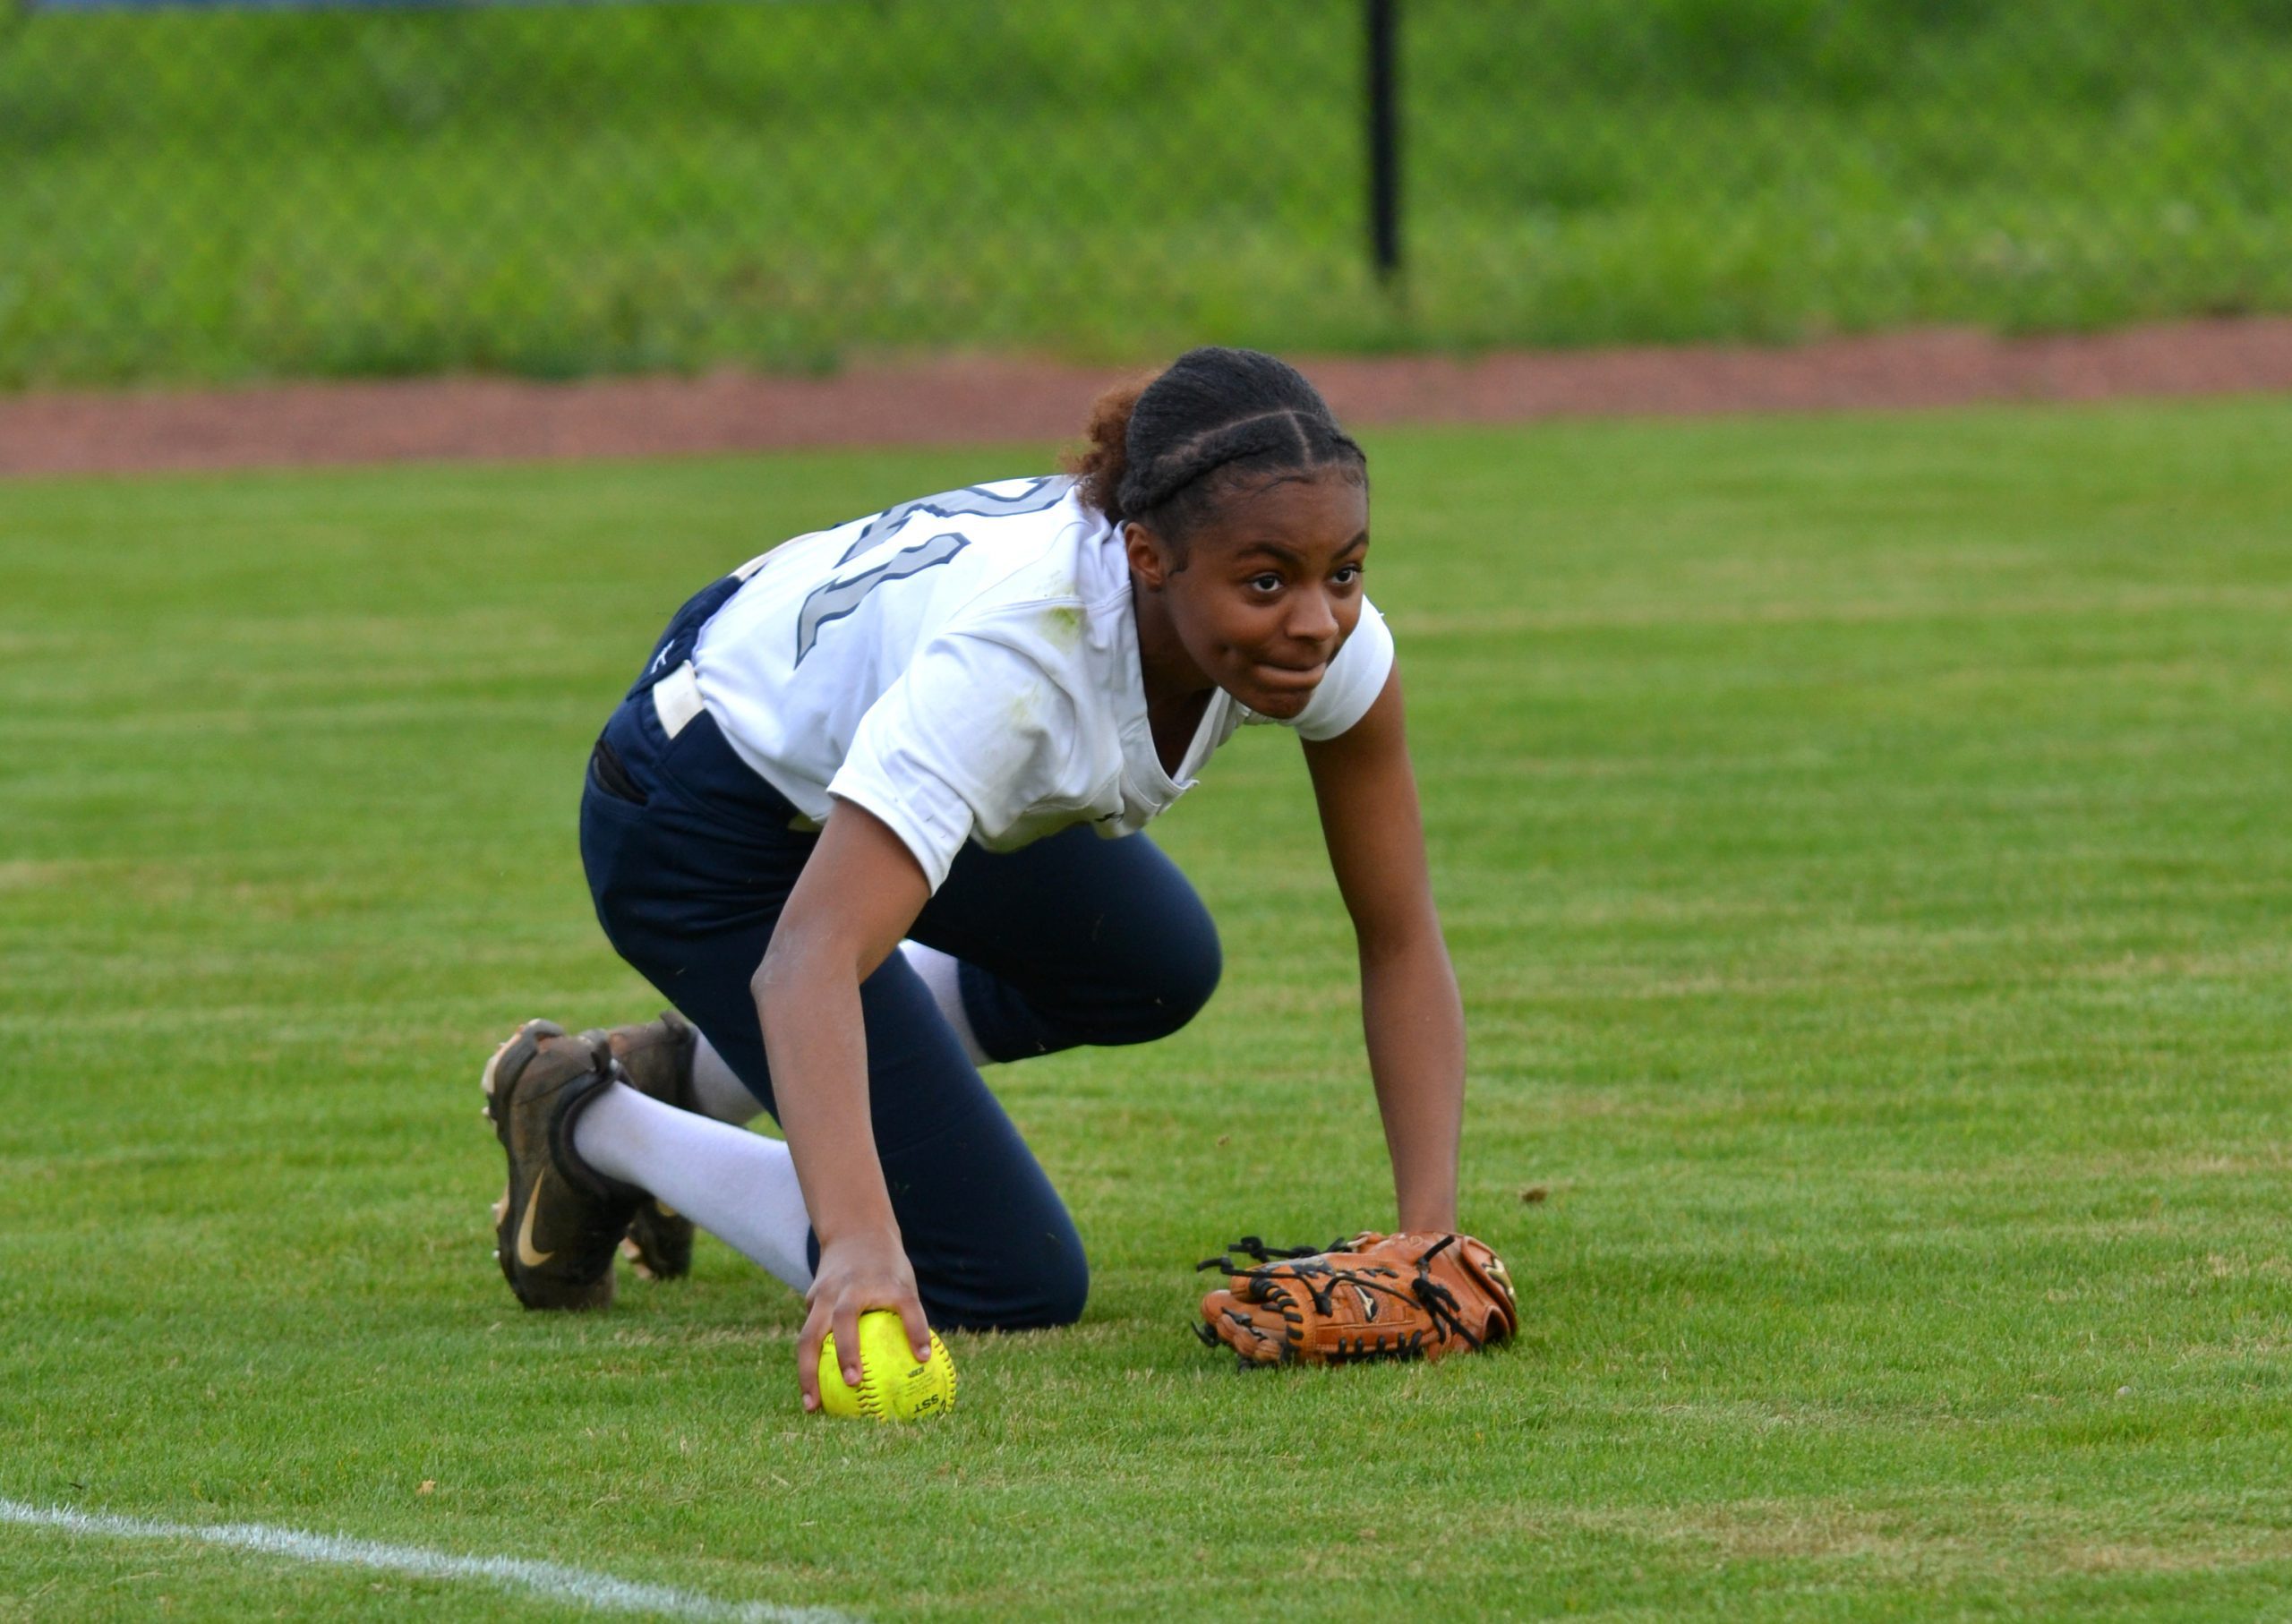 SOFTBALL ROUNDUP: No. 8 Springville clears Oxford again; Gardendale blanks Clay-Chalkville